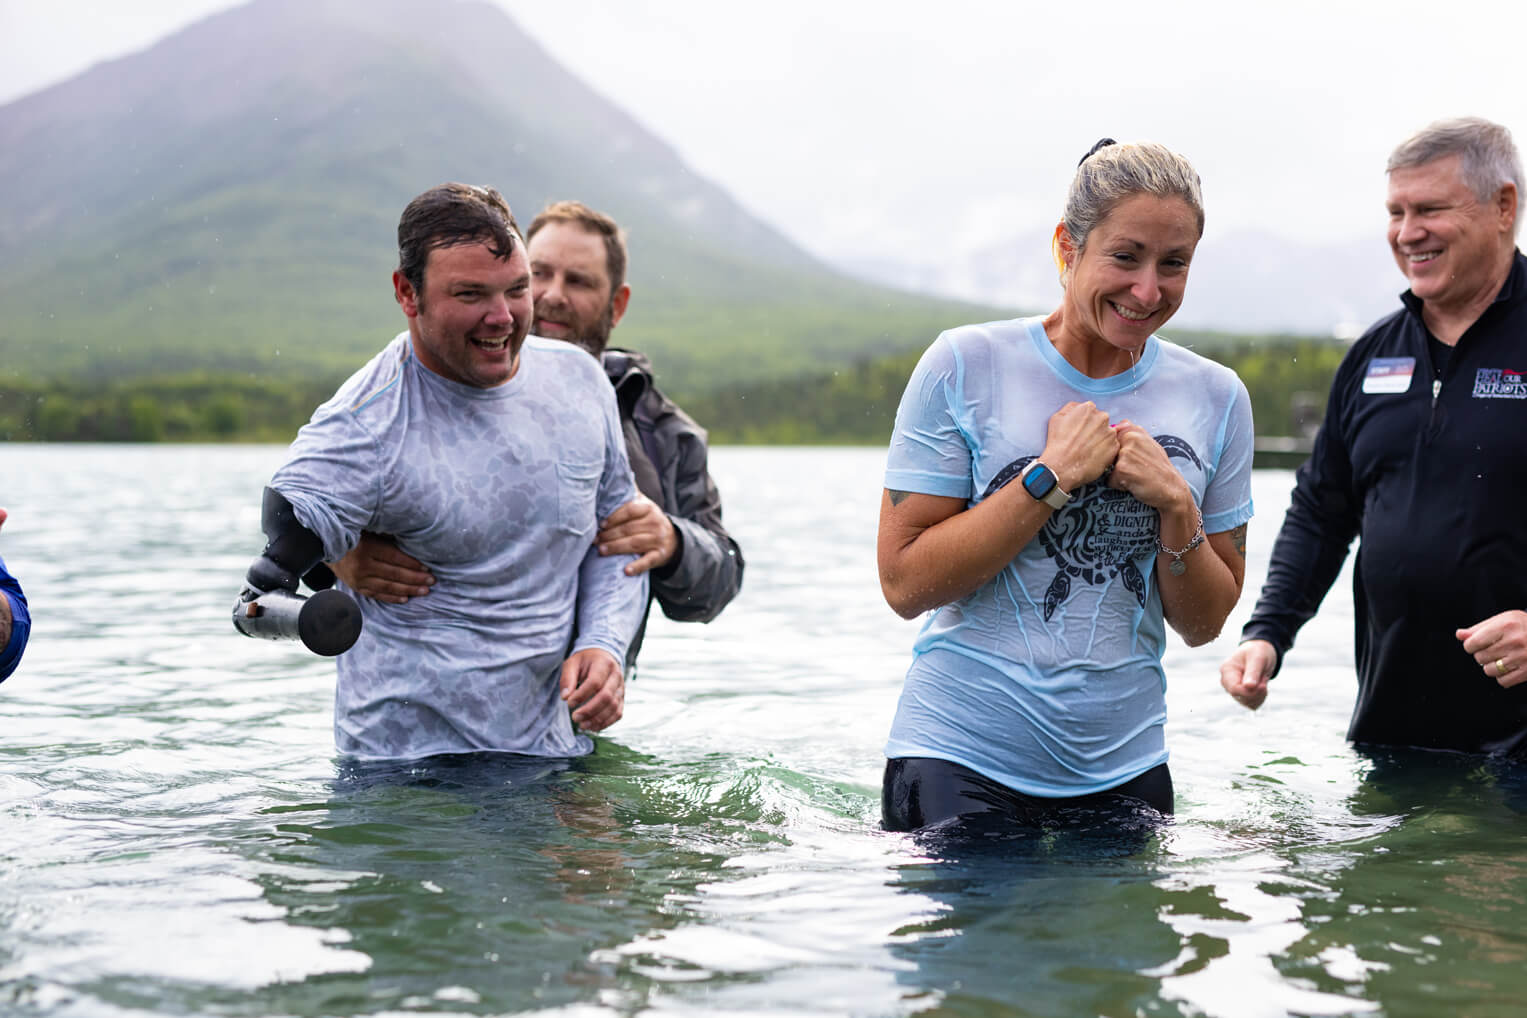 Army Sergeant First Class Ryan Davis and his wife, Asia, were baptized last week in Lake Clark.